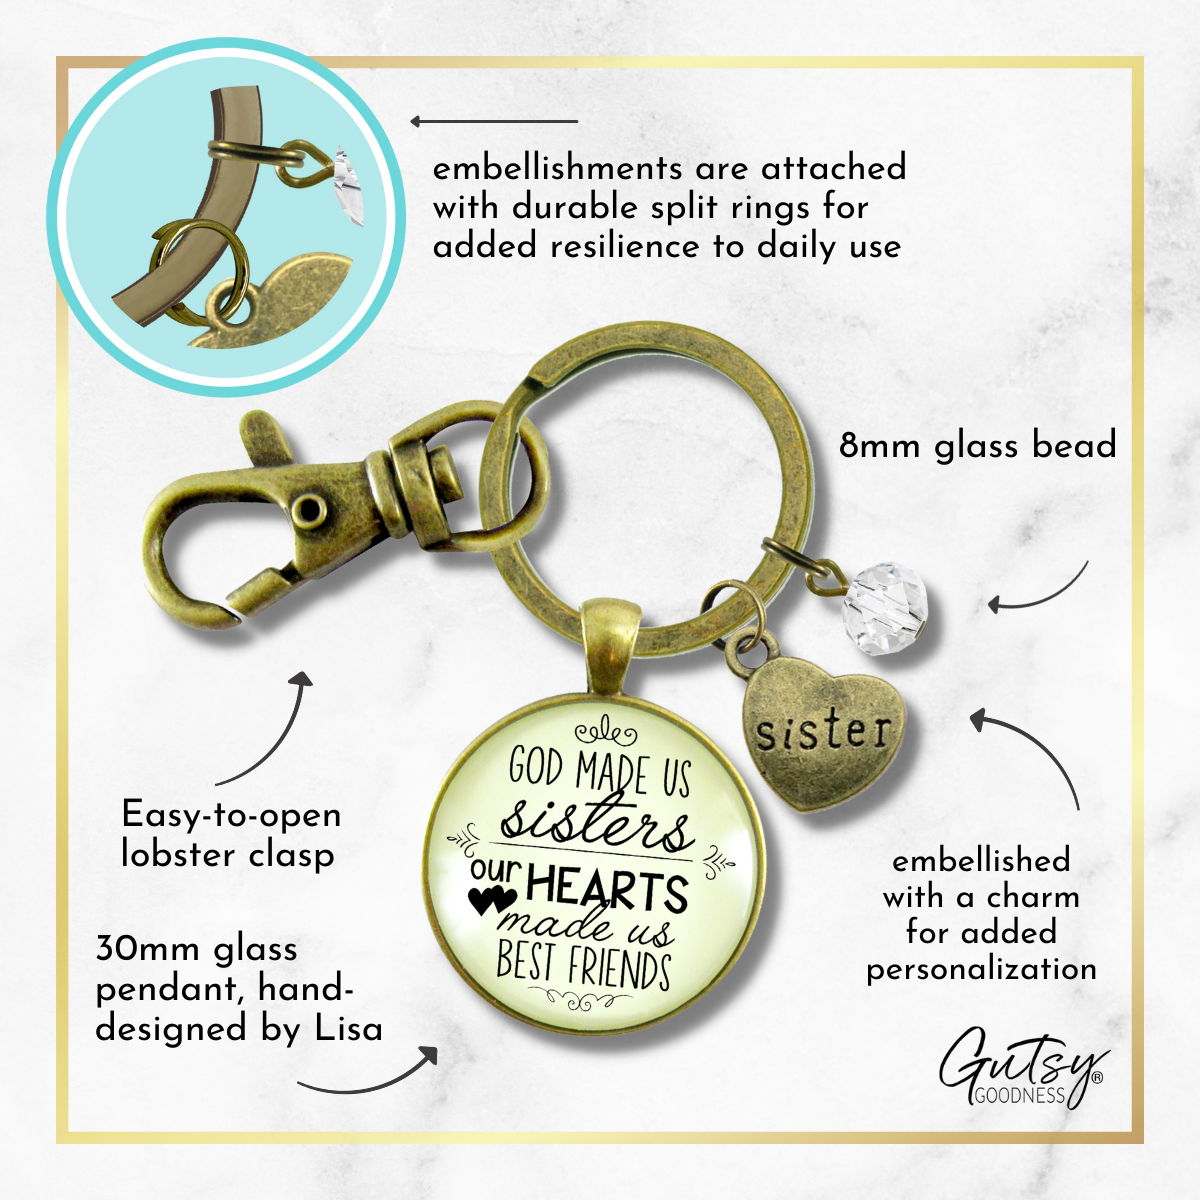 Sisters Keychain God Made Us Sisters Best Friends Faith Pendant Jewelry Heart Charm - Gutsy Goodness Handmade Jewelry;Sisters Keychain God Made Us Sisters Best Friends Faith Pendant Jewelry Heart Charm - Gutsy Goodness Handmade Jewelry Gifts